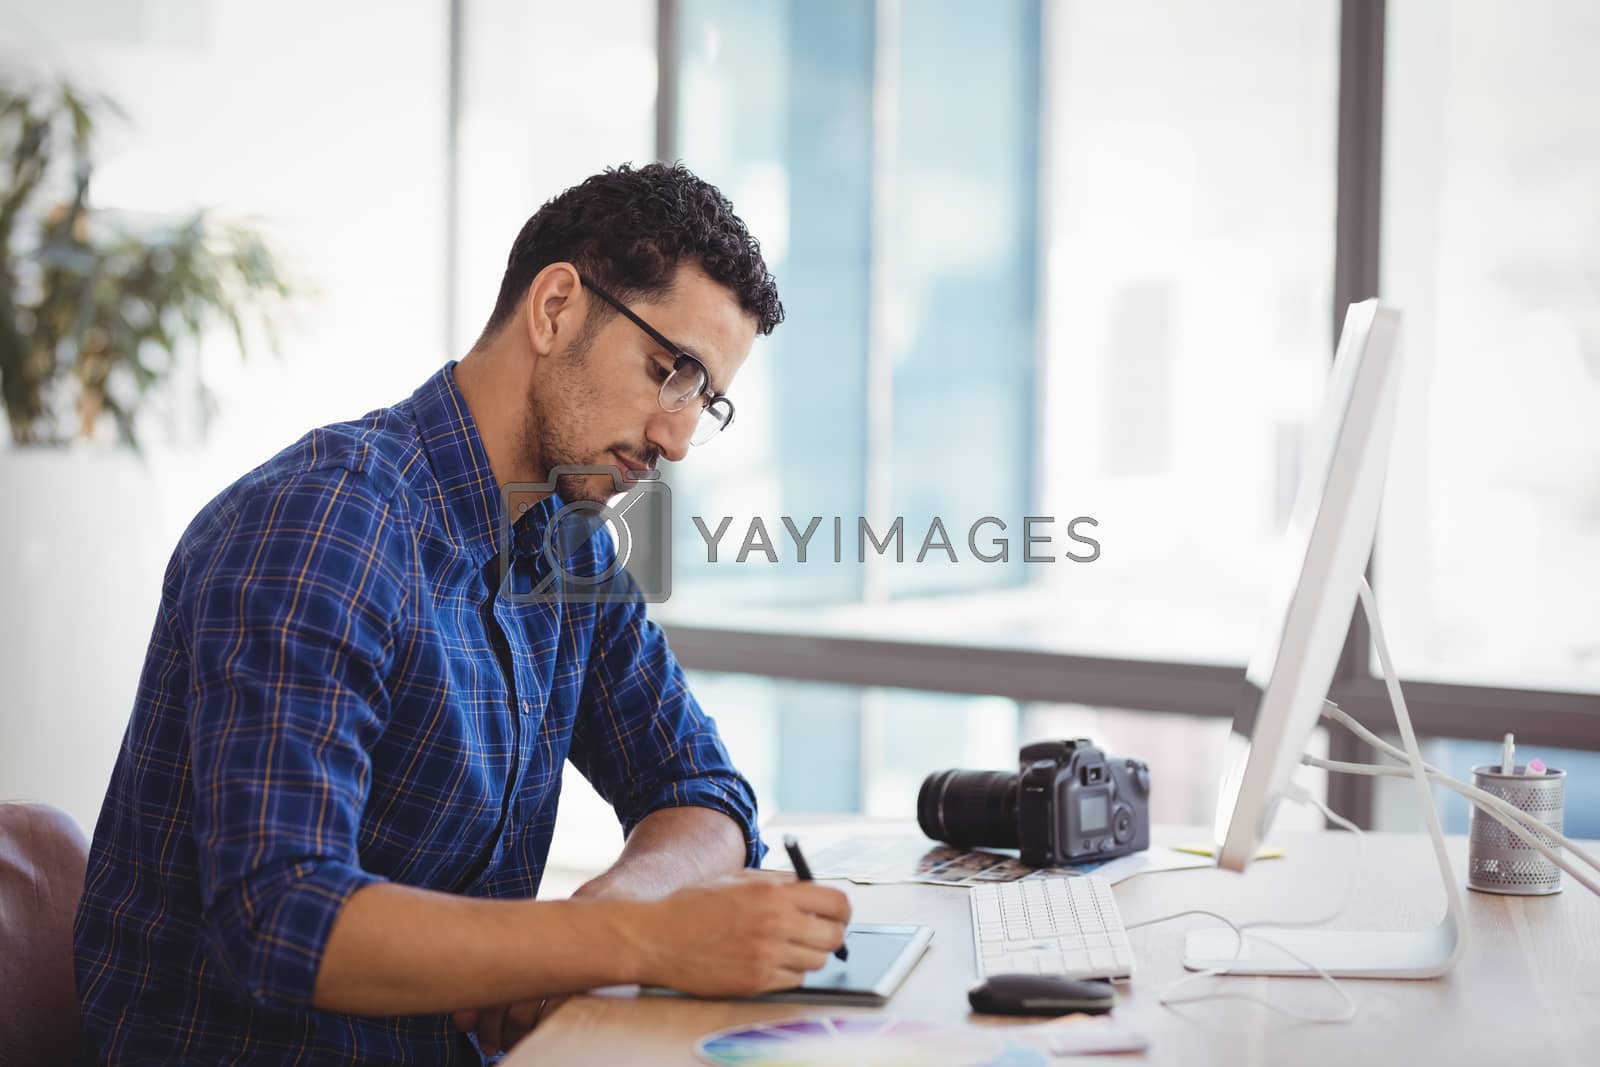 Royalty free image of Graphic designer using graphic tablet at desk by Wavebreakmedia